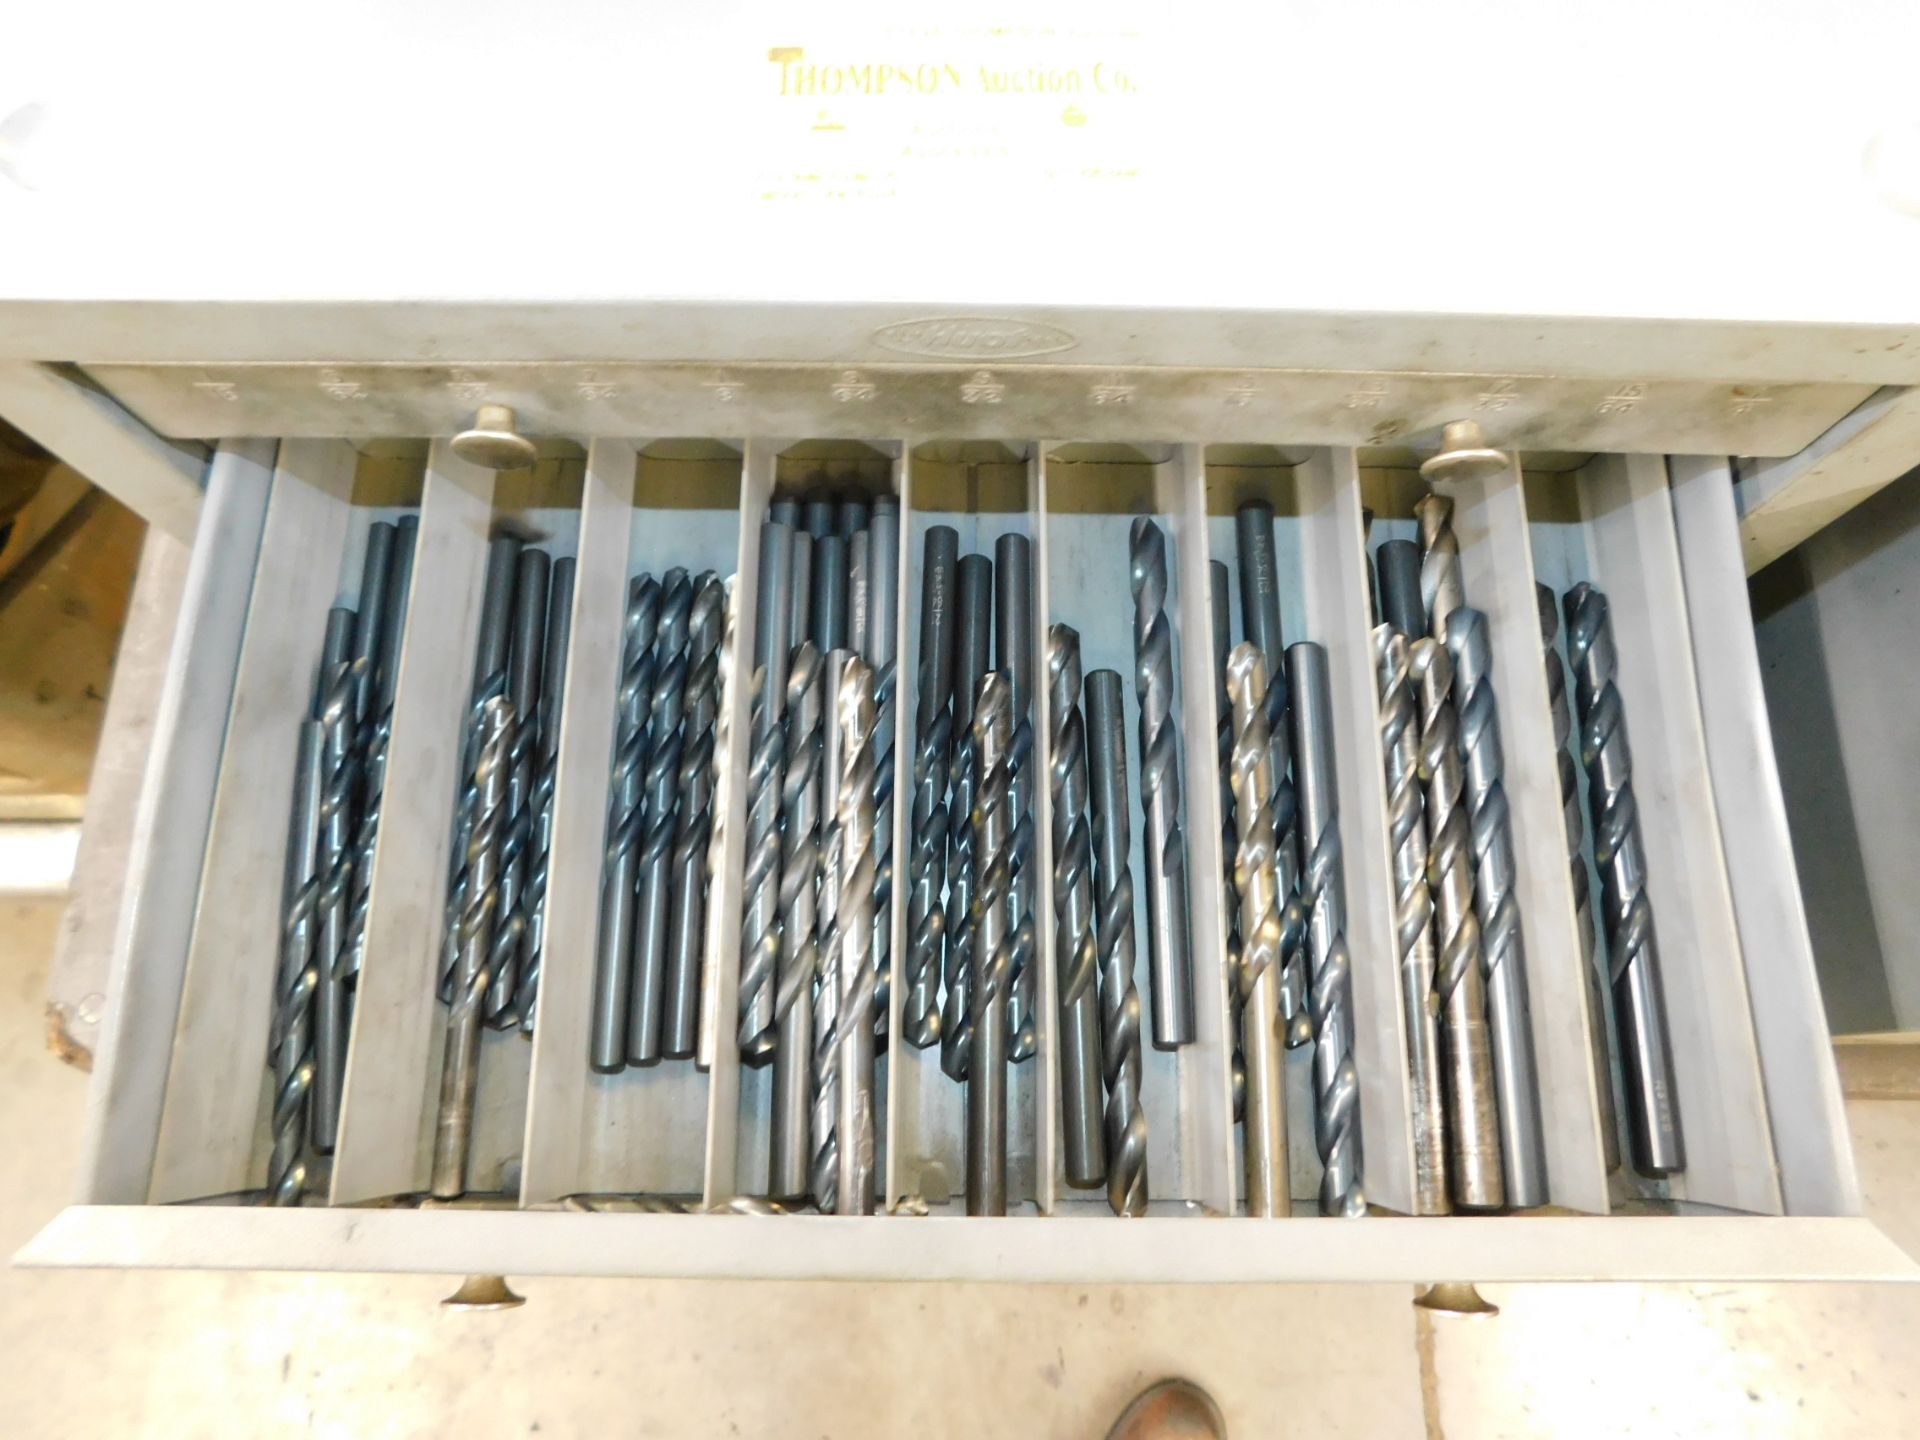 Drill Bit Cabinet with Fractional Drill Bits - Image 3 of 4